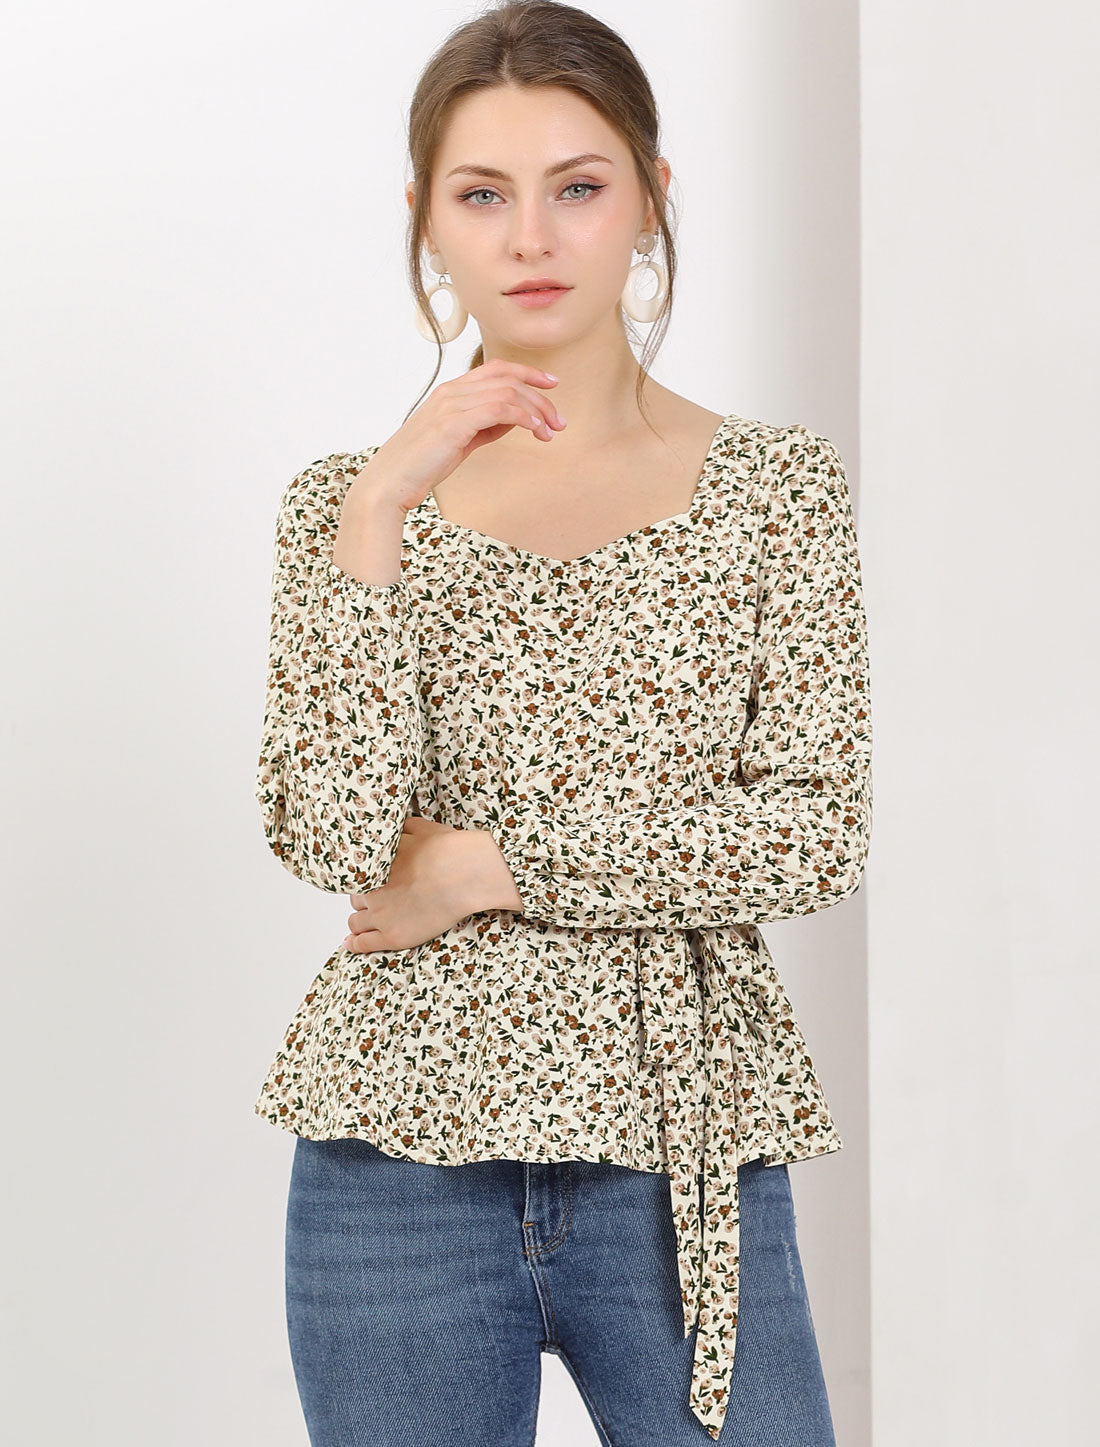 Allegra K Long Sleeve Square Neck Belted Peplum Floral Top Blouse